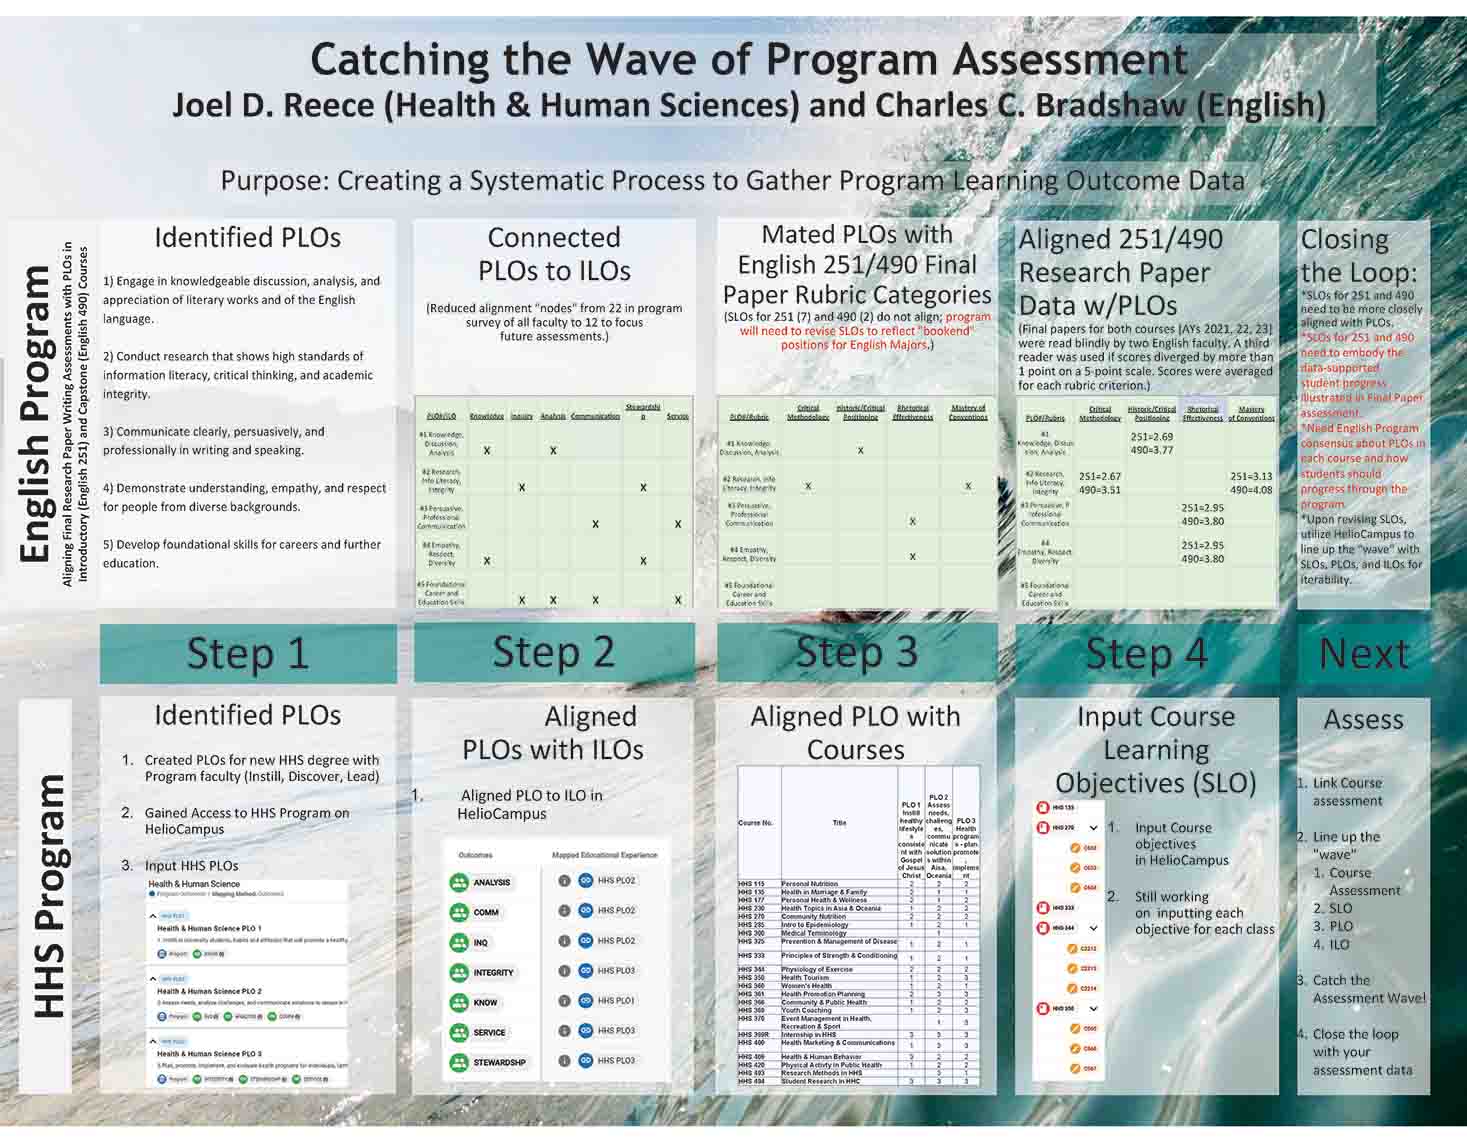 Catching the Wave of Program Assessment